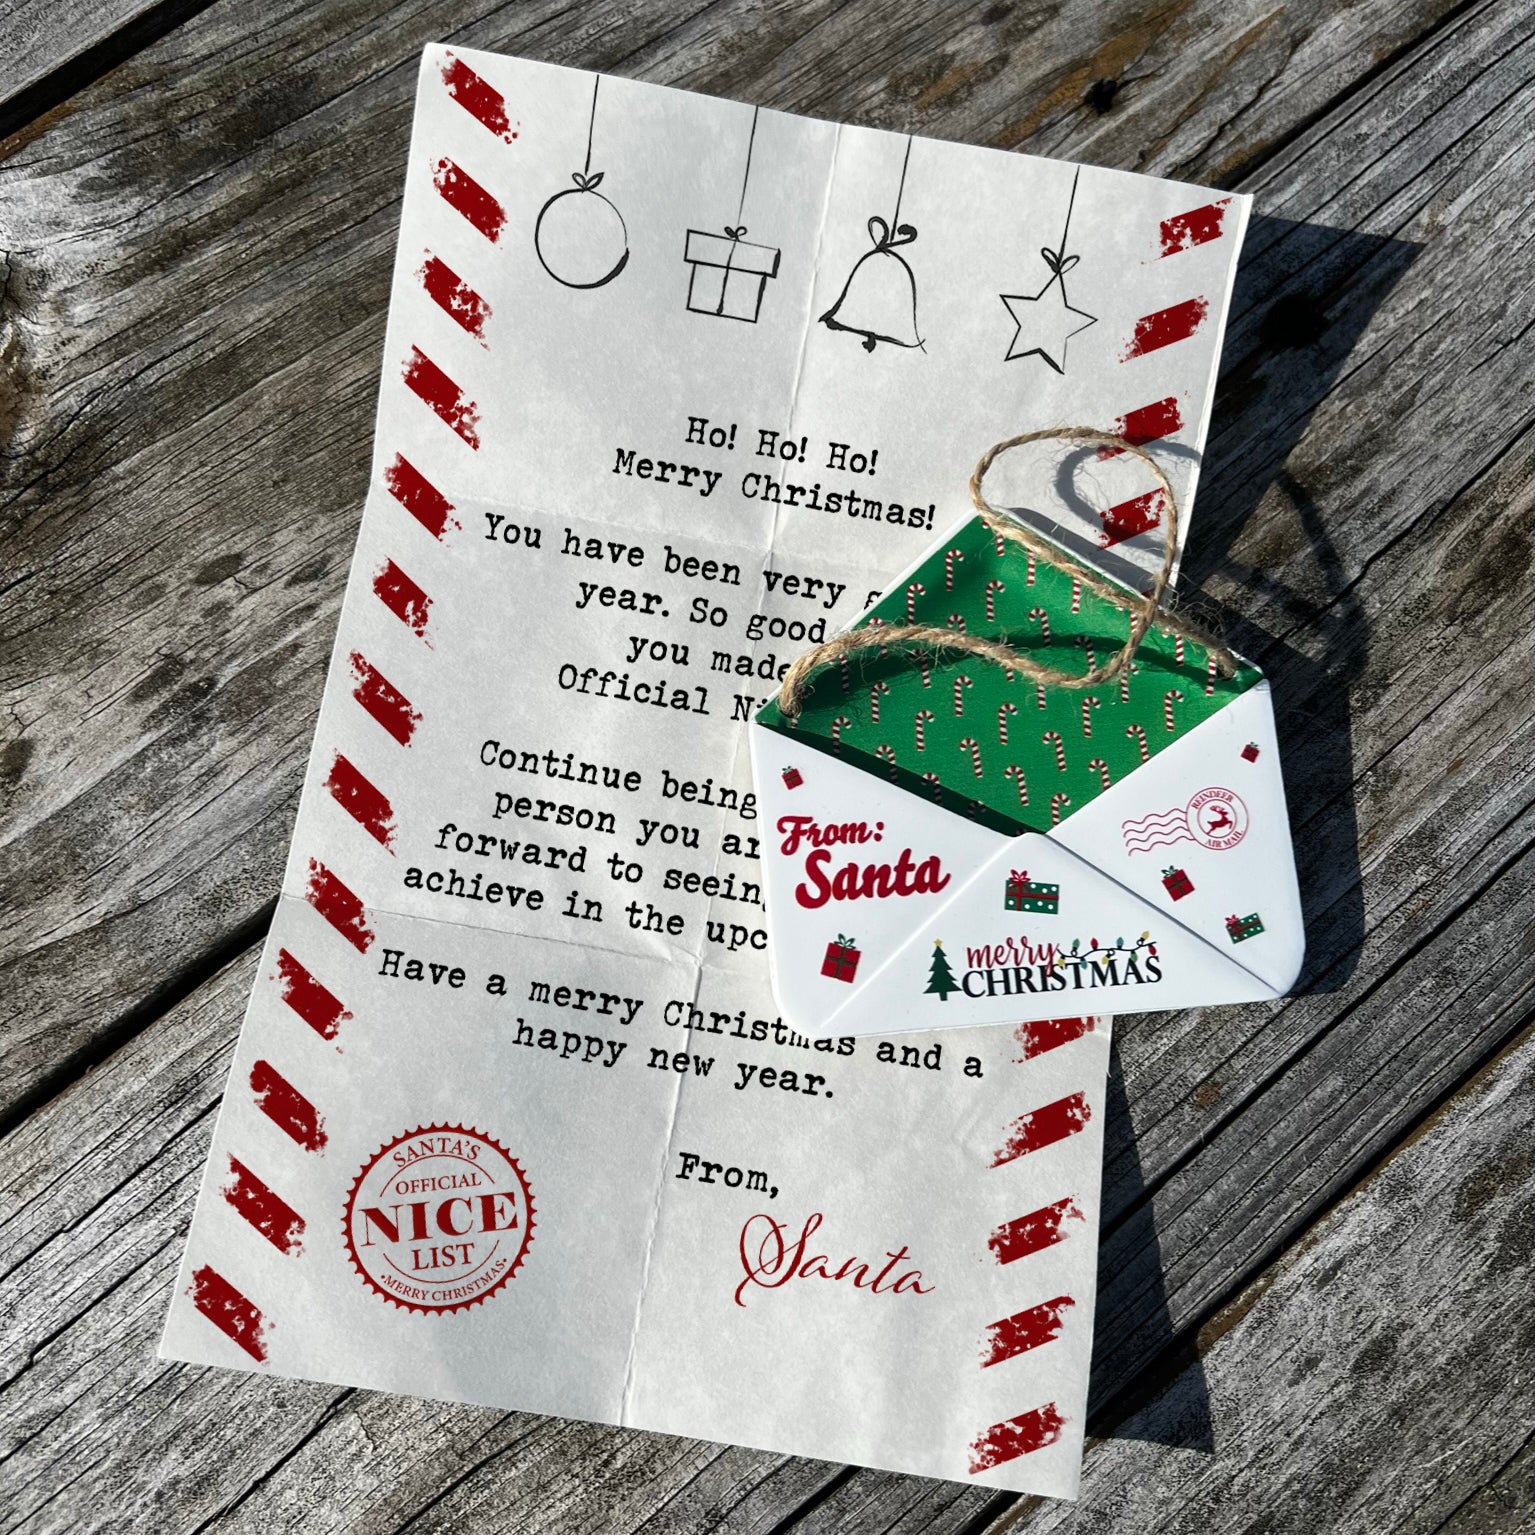 Christmas Collection (Note From Santa) Green Candy Cane Envelope Resin Ornament